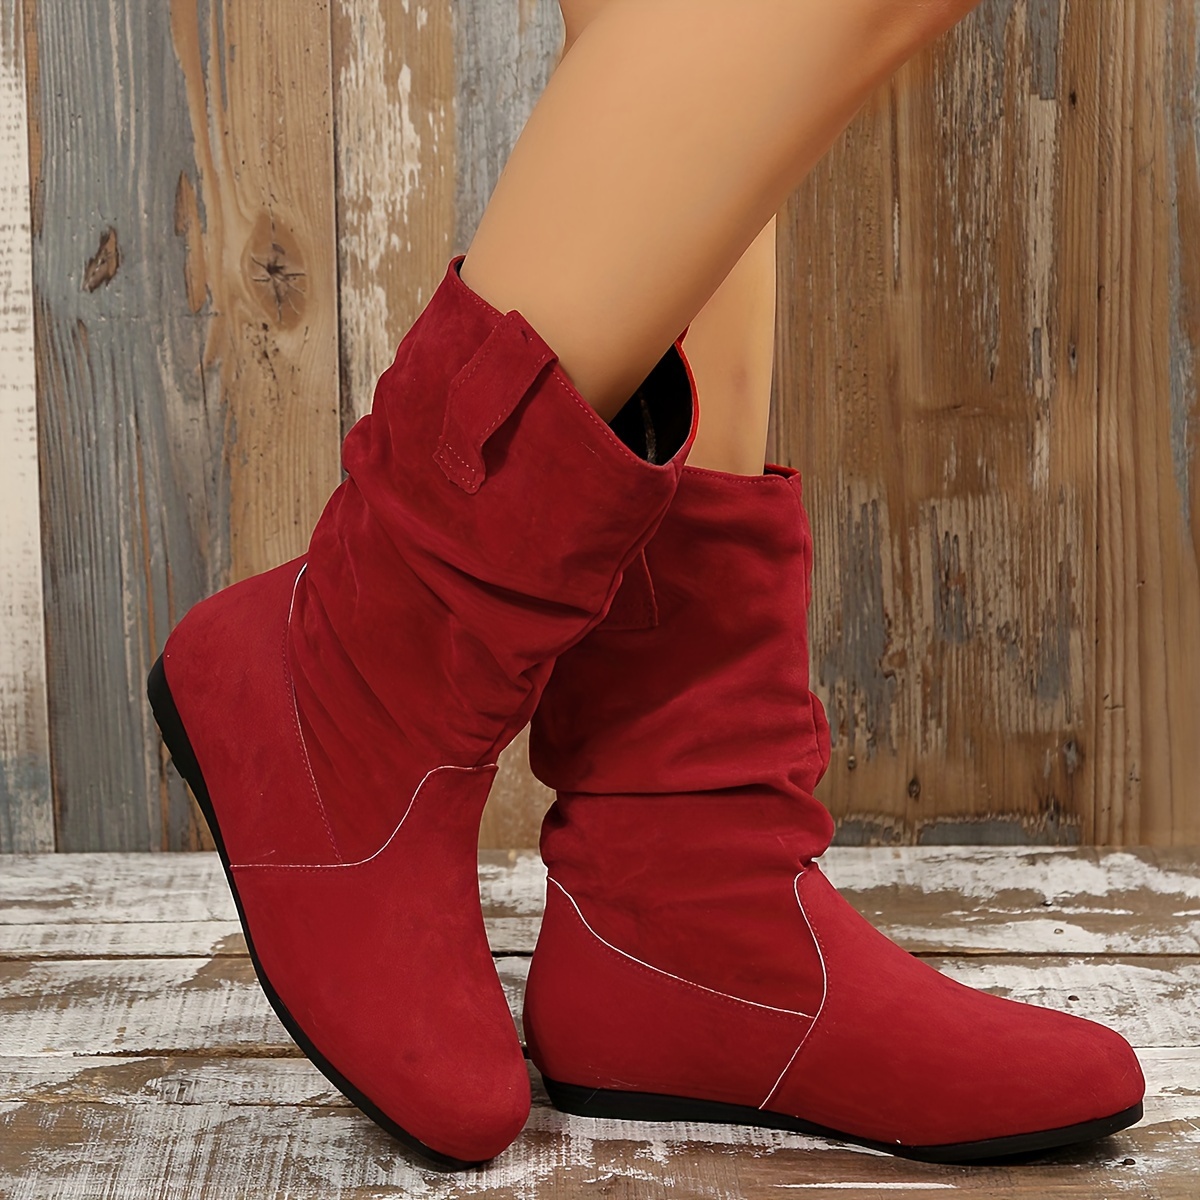 Women's Slouchy * Calf Boots, Comfy V-cut Pull On Plush Lined Warm Flat  Shoes, Winter Thermal Boots